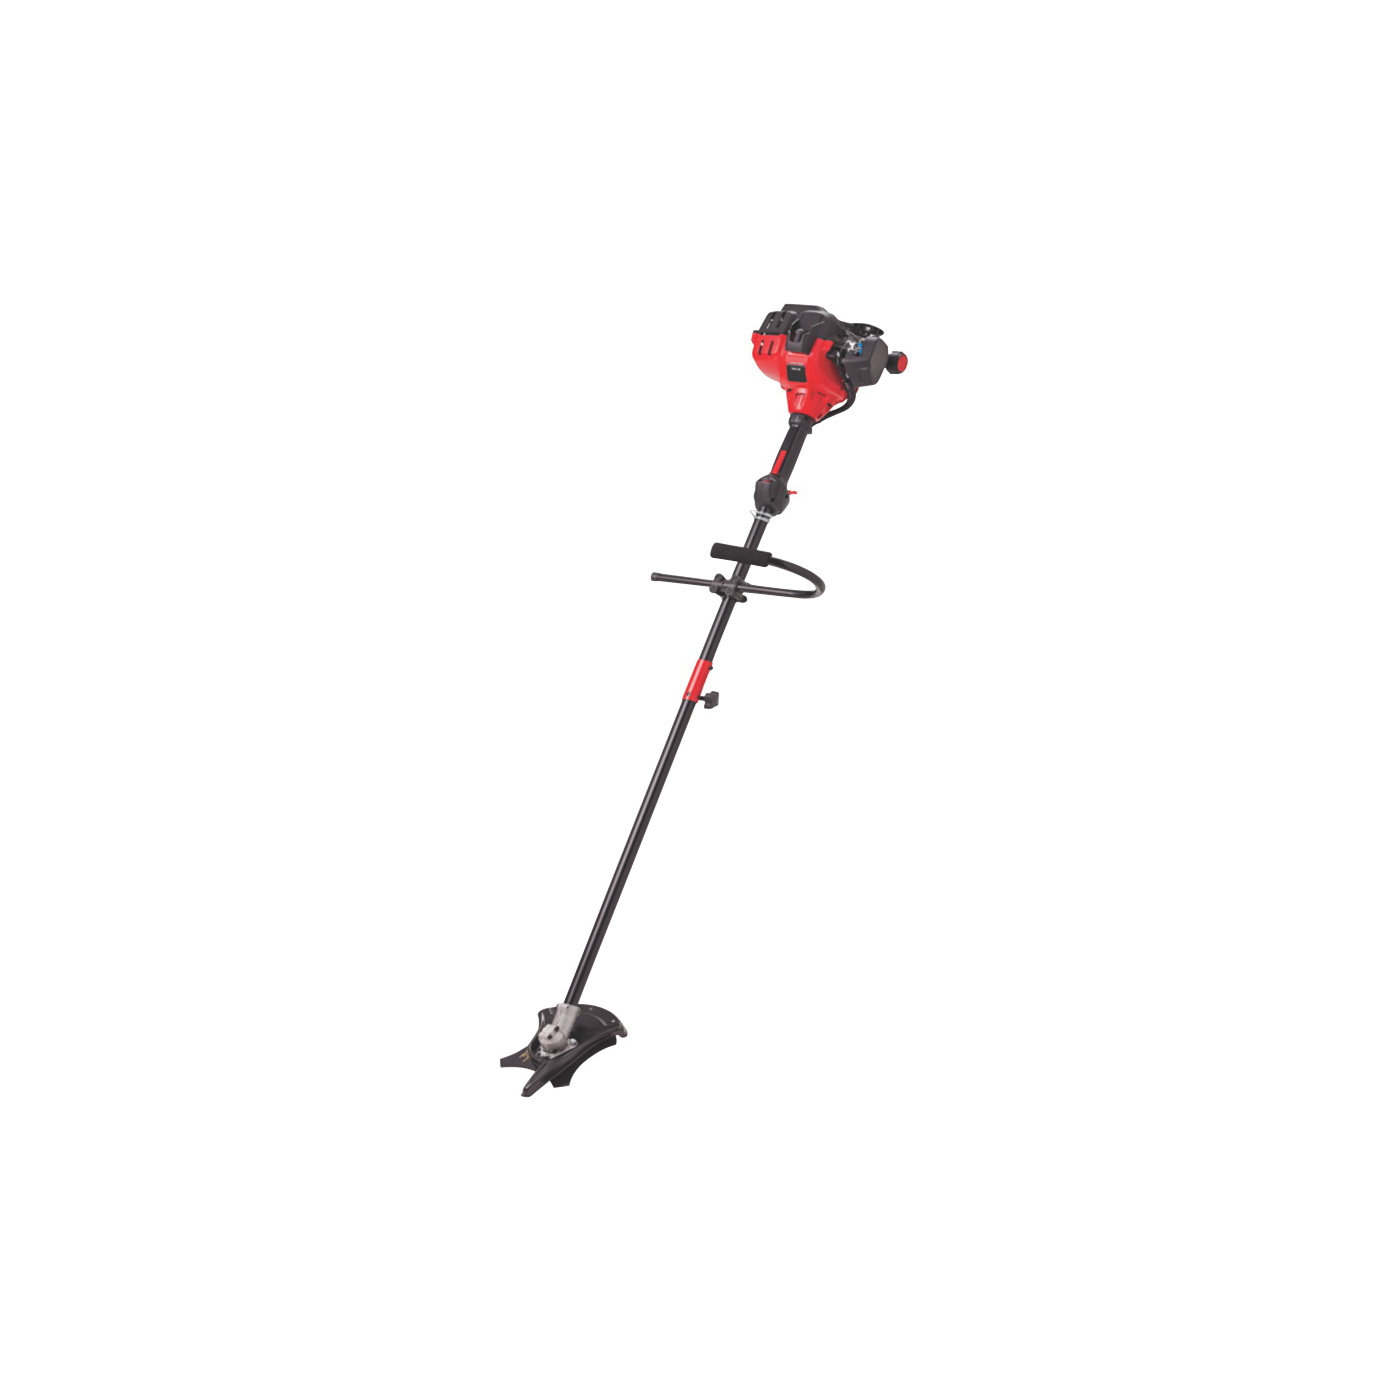 41ADZ42C766 Shaft Brushcutter, Engine Specifications: 2-Cycle, 27 cc, 18 in Cutting Capacity, Gasoline